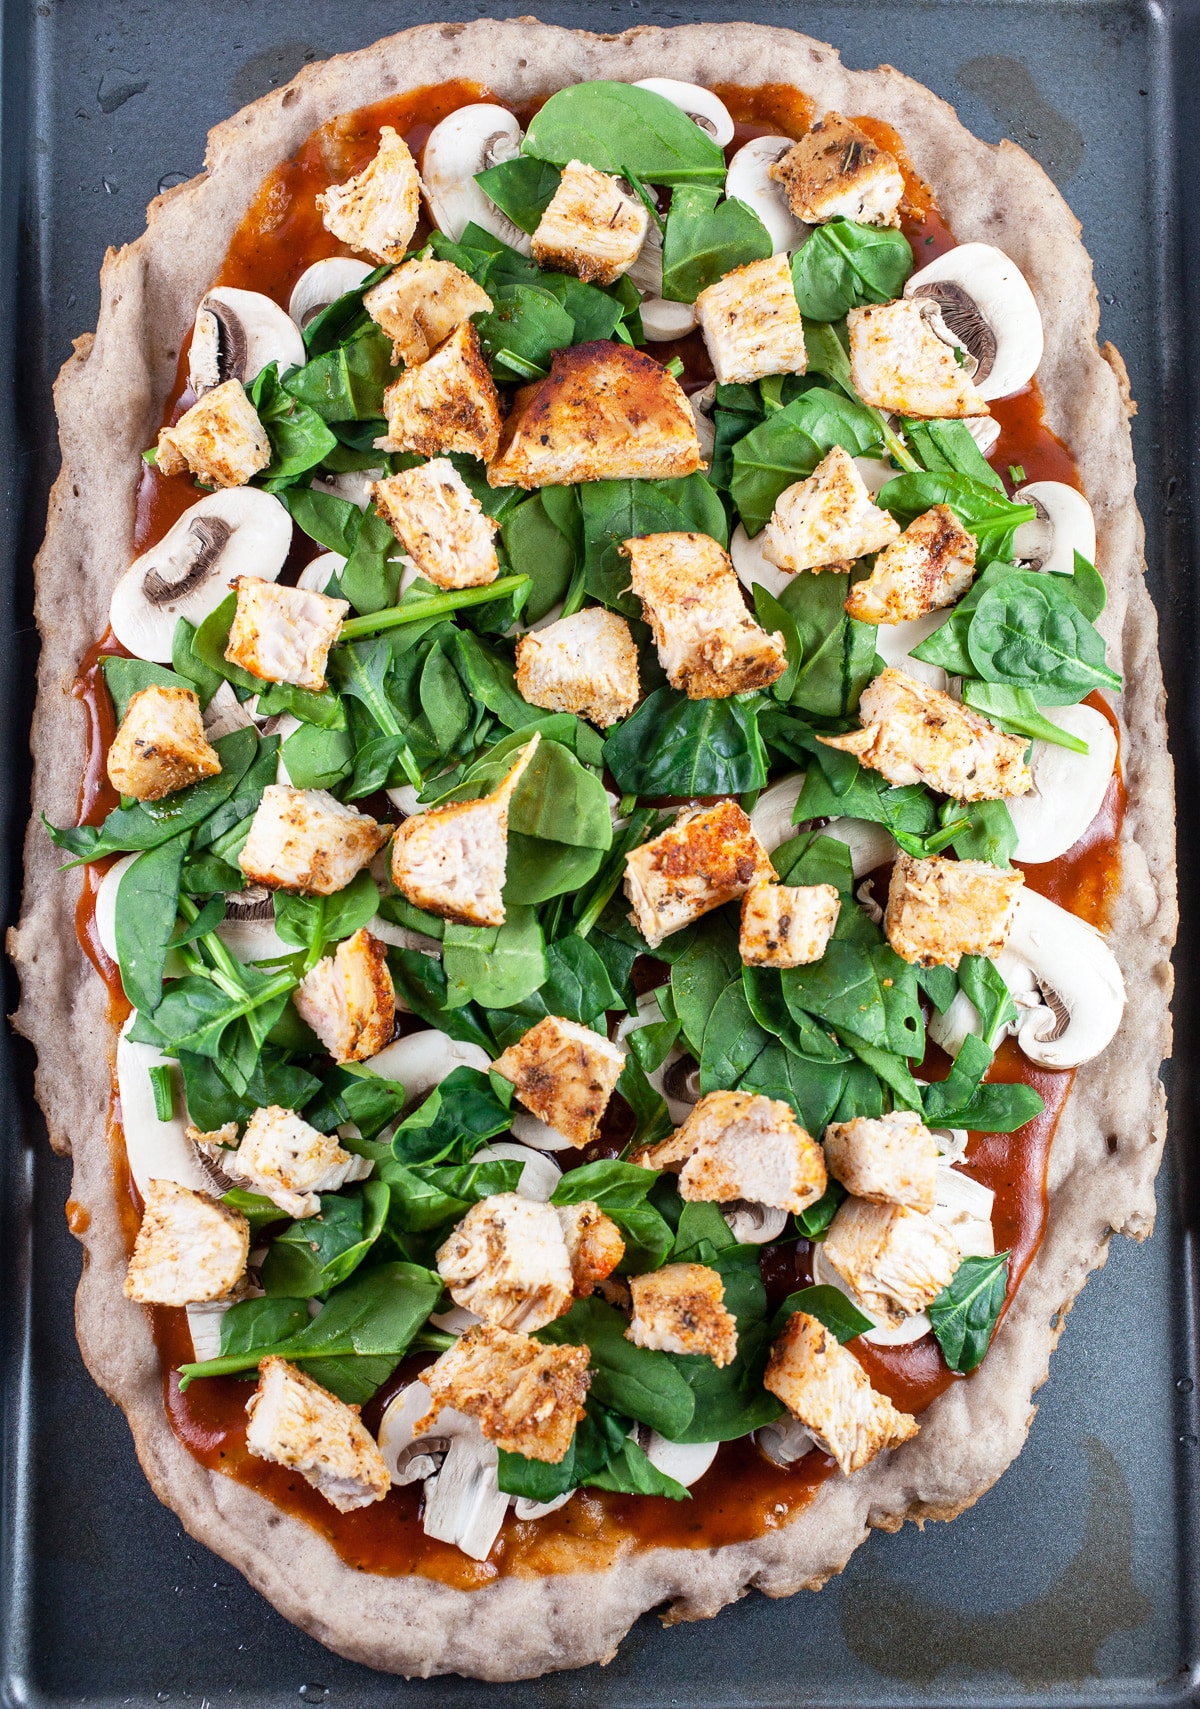 Pizza crust with BBQ sauce, mushrooms, spinach, and diced chicken on baking sheet.